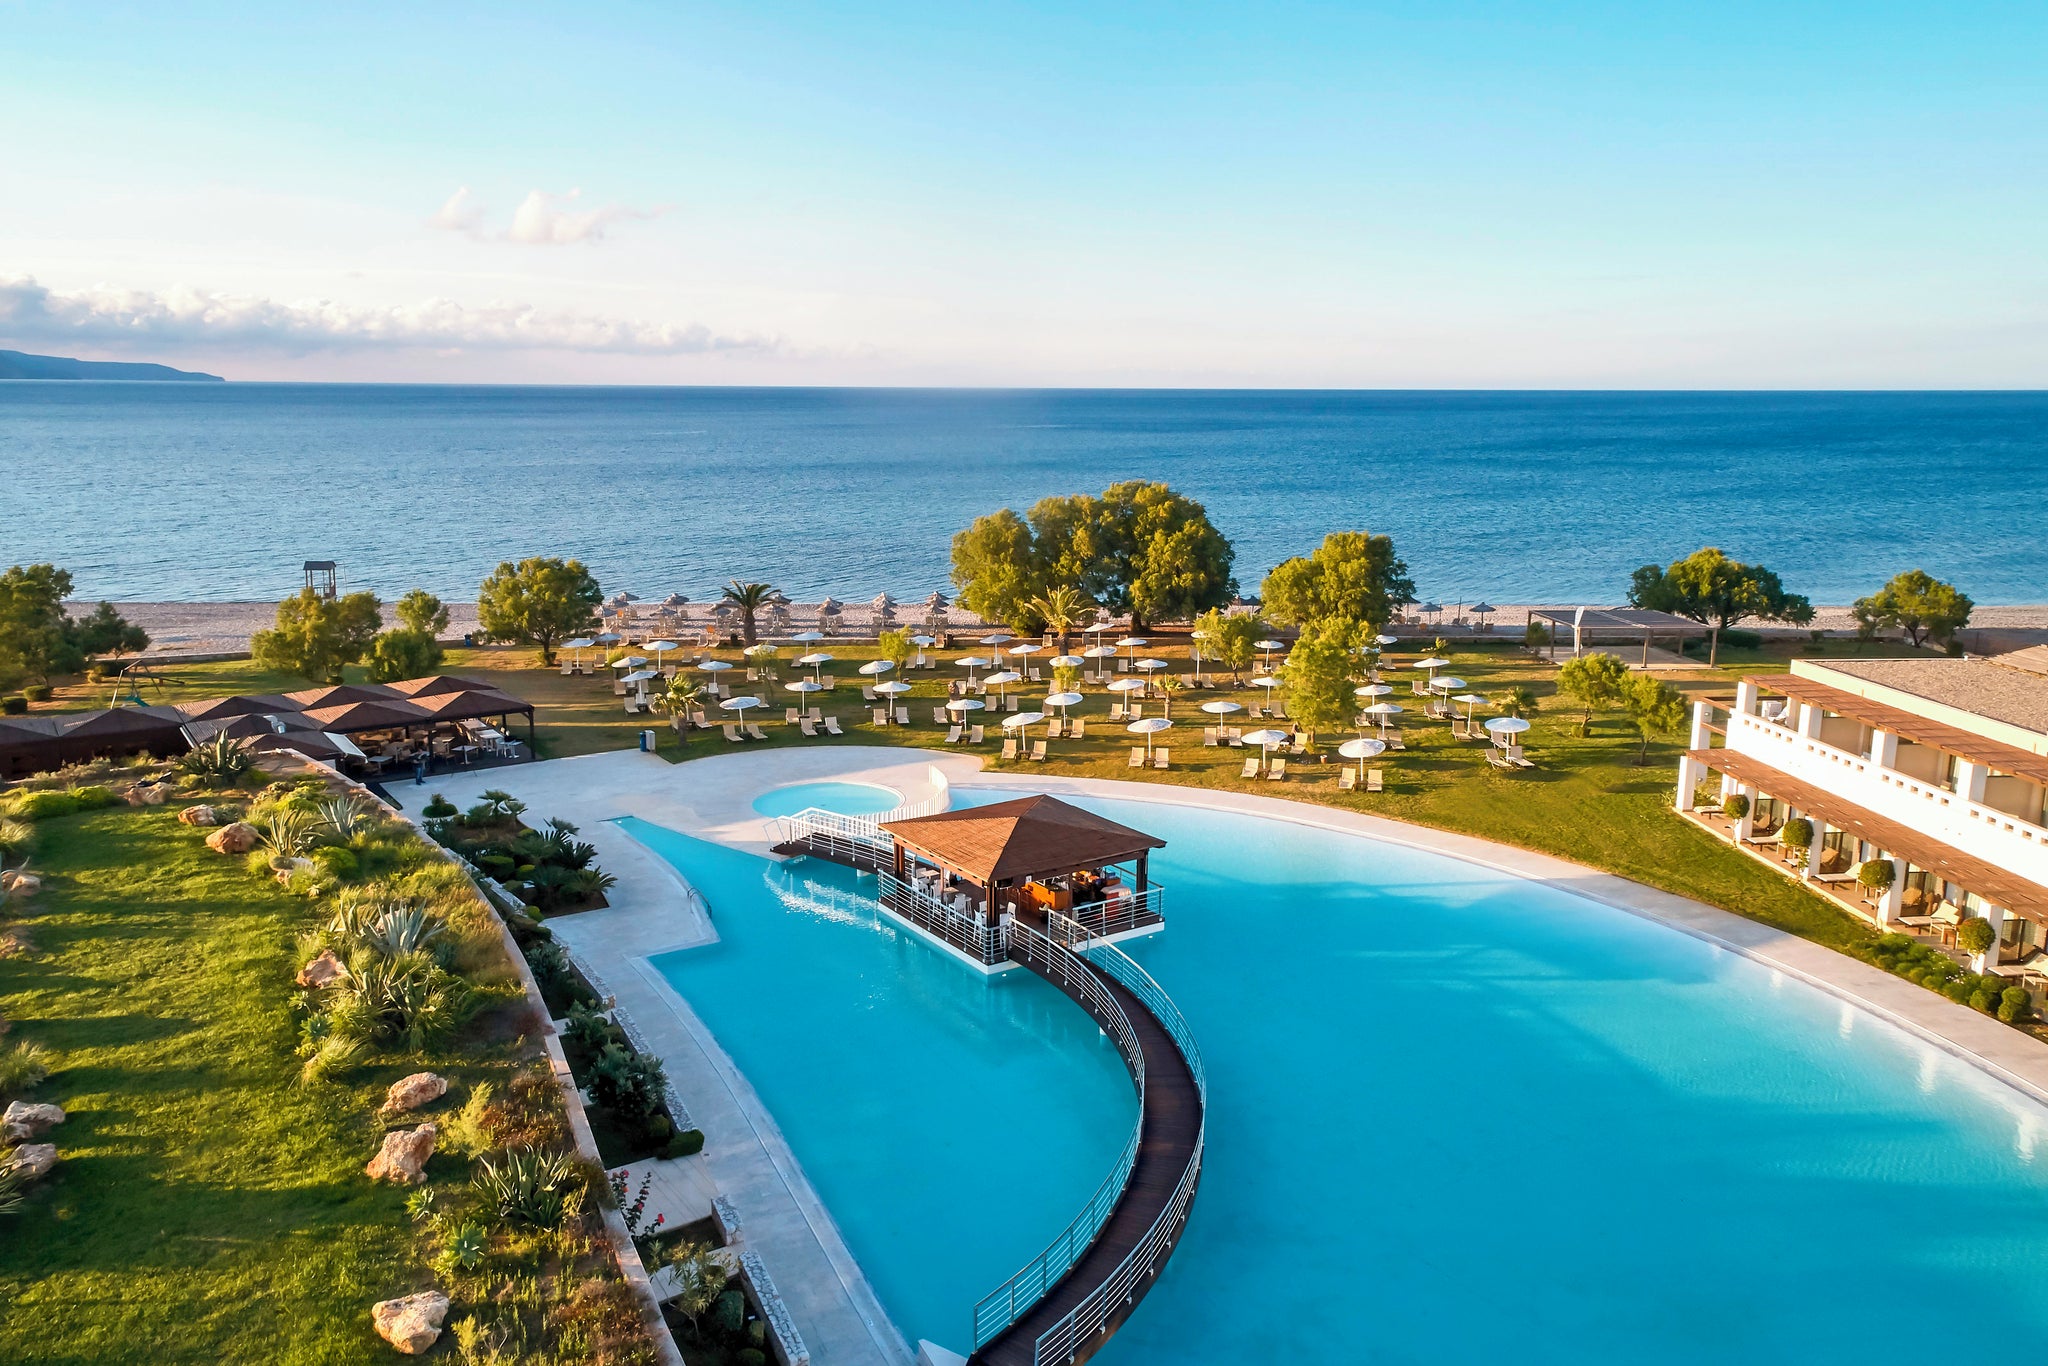 Enter our competition for a chance to win an idyllic family break at Giannoulis Cavo Spada Luxury Sports & Leisure Resort in Kolymbari, Crete